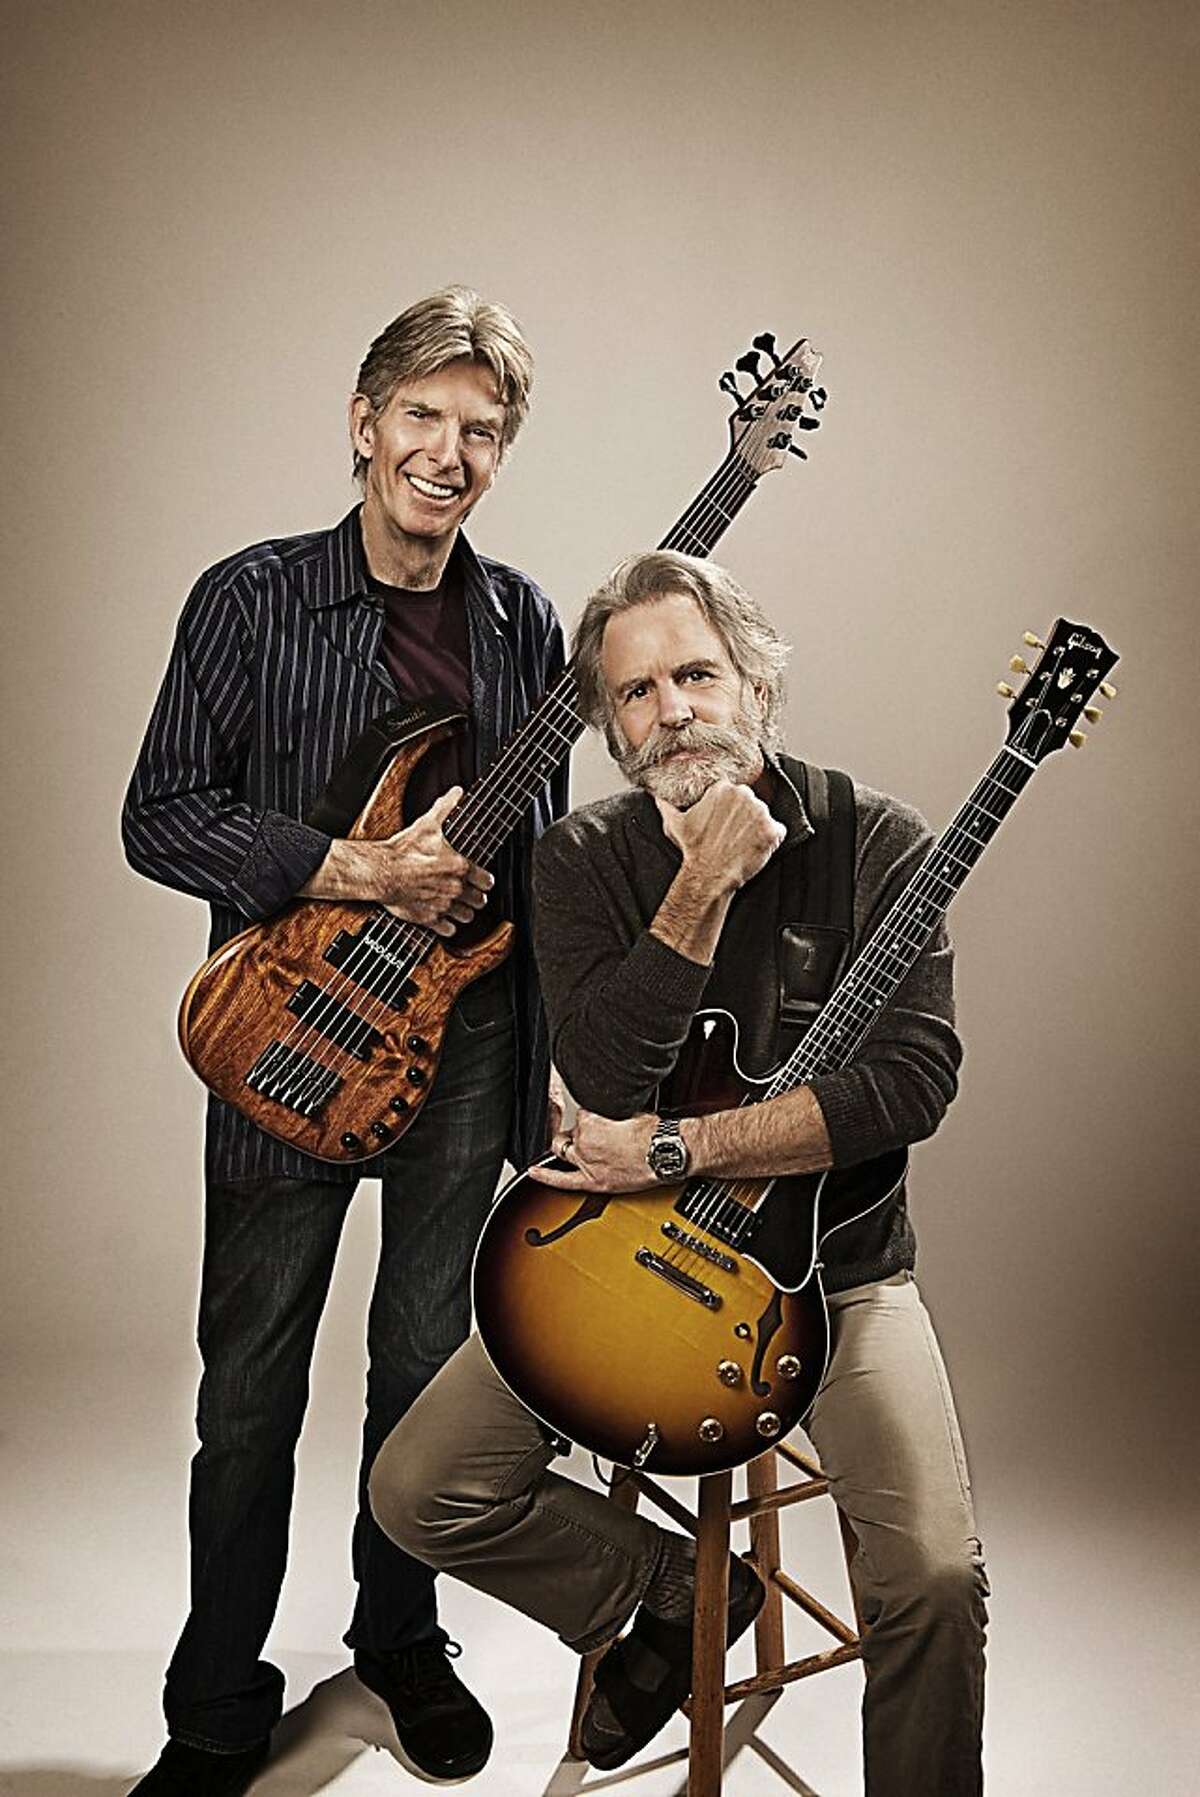 Furthur, featuring the Grateful Dead's Phil Lesh (l.) and Bob Weir (r.).